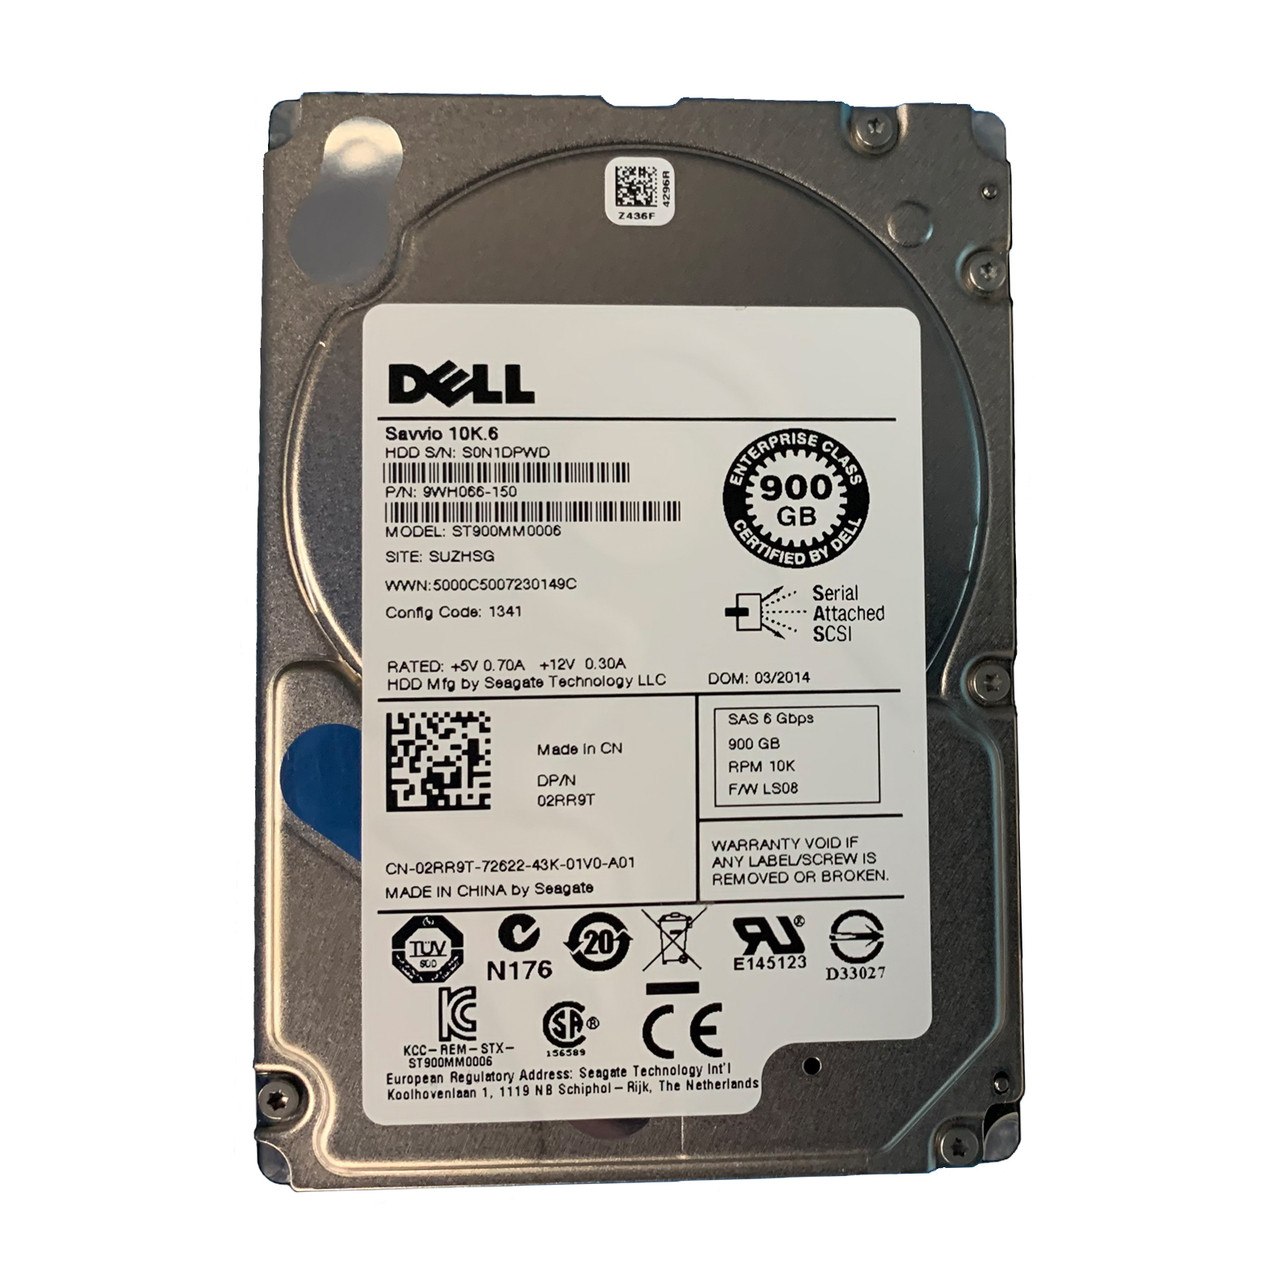 Dell 2RR9T 900GB SAS 10K 6GBPS 2.5" Drive 9WH066-150 ST900MM0006